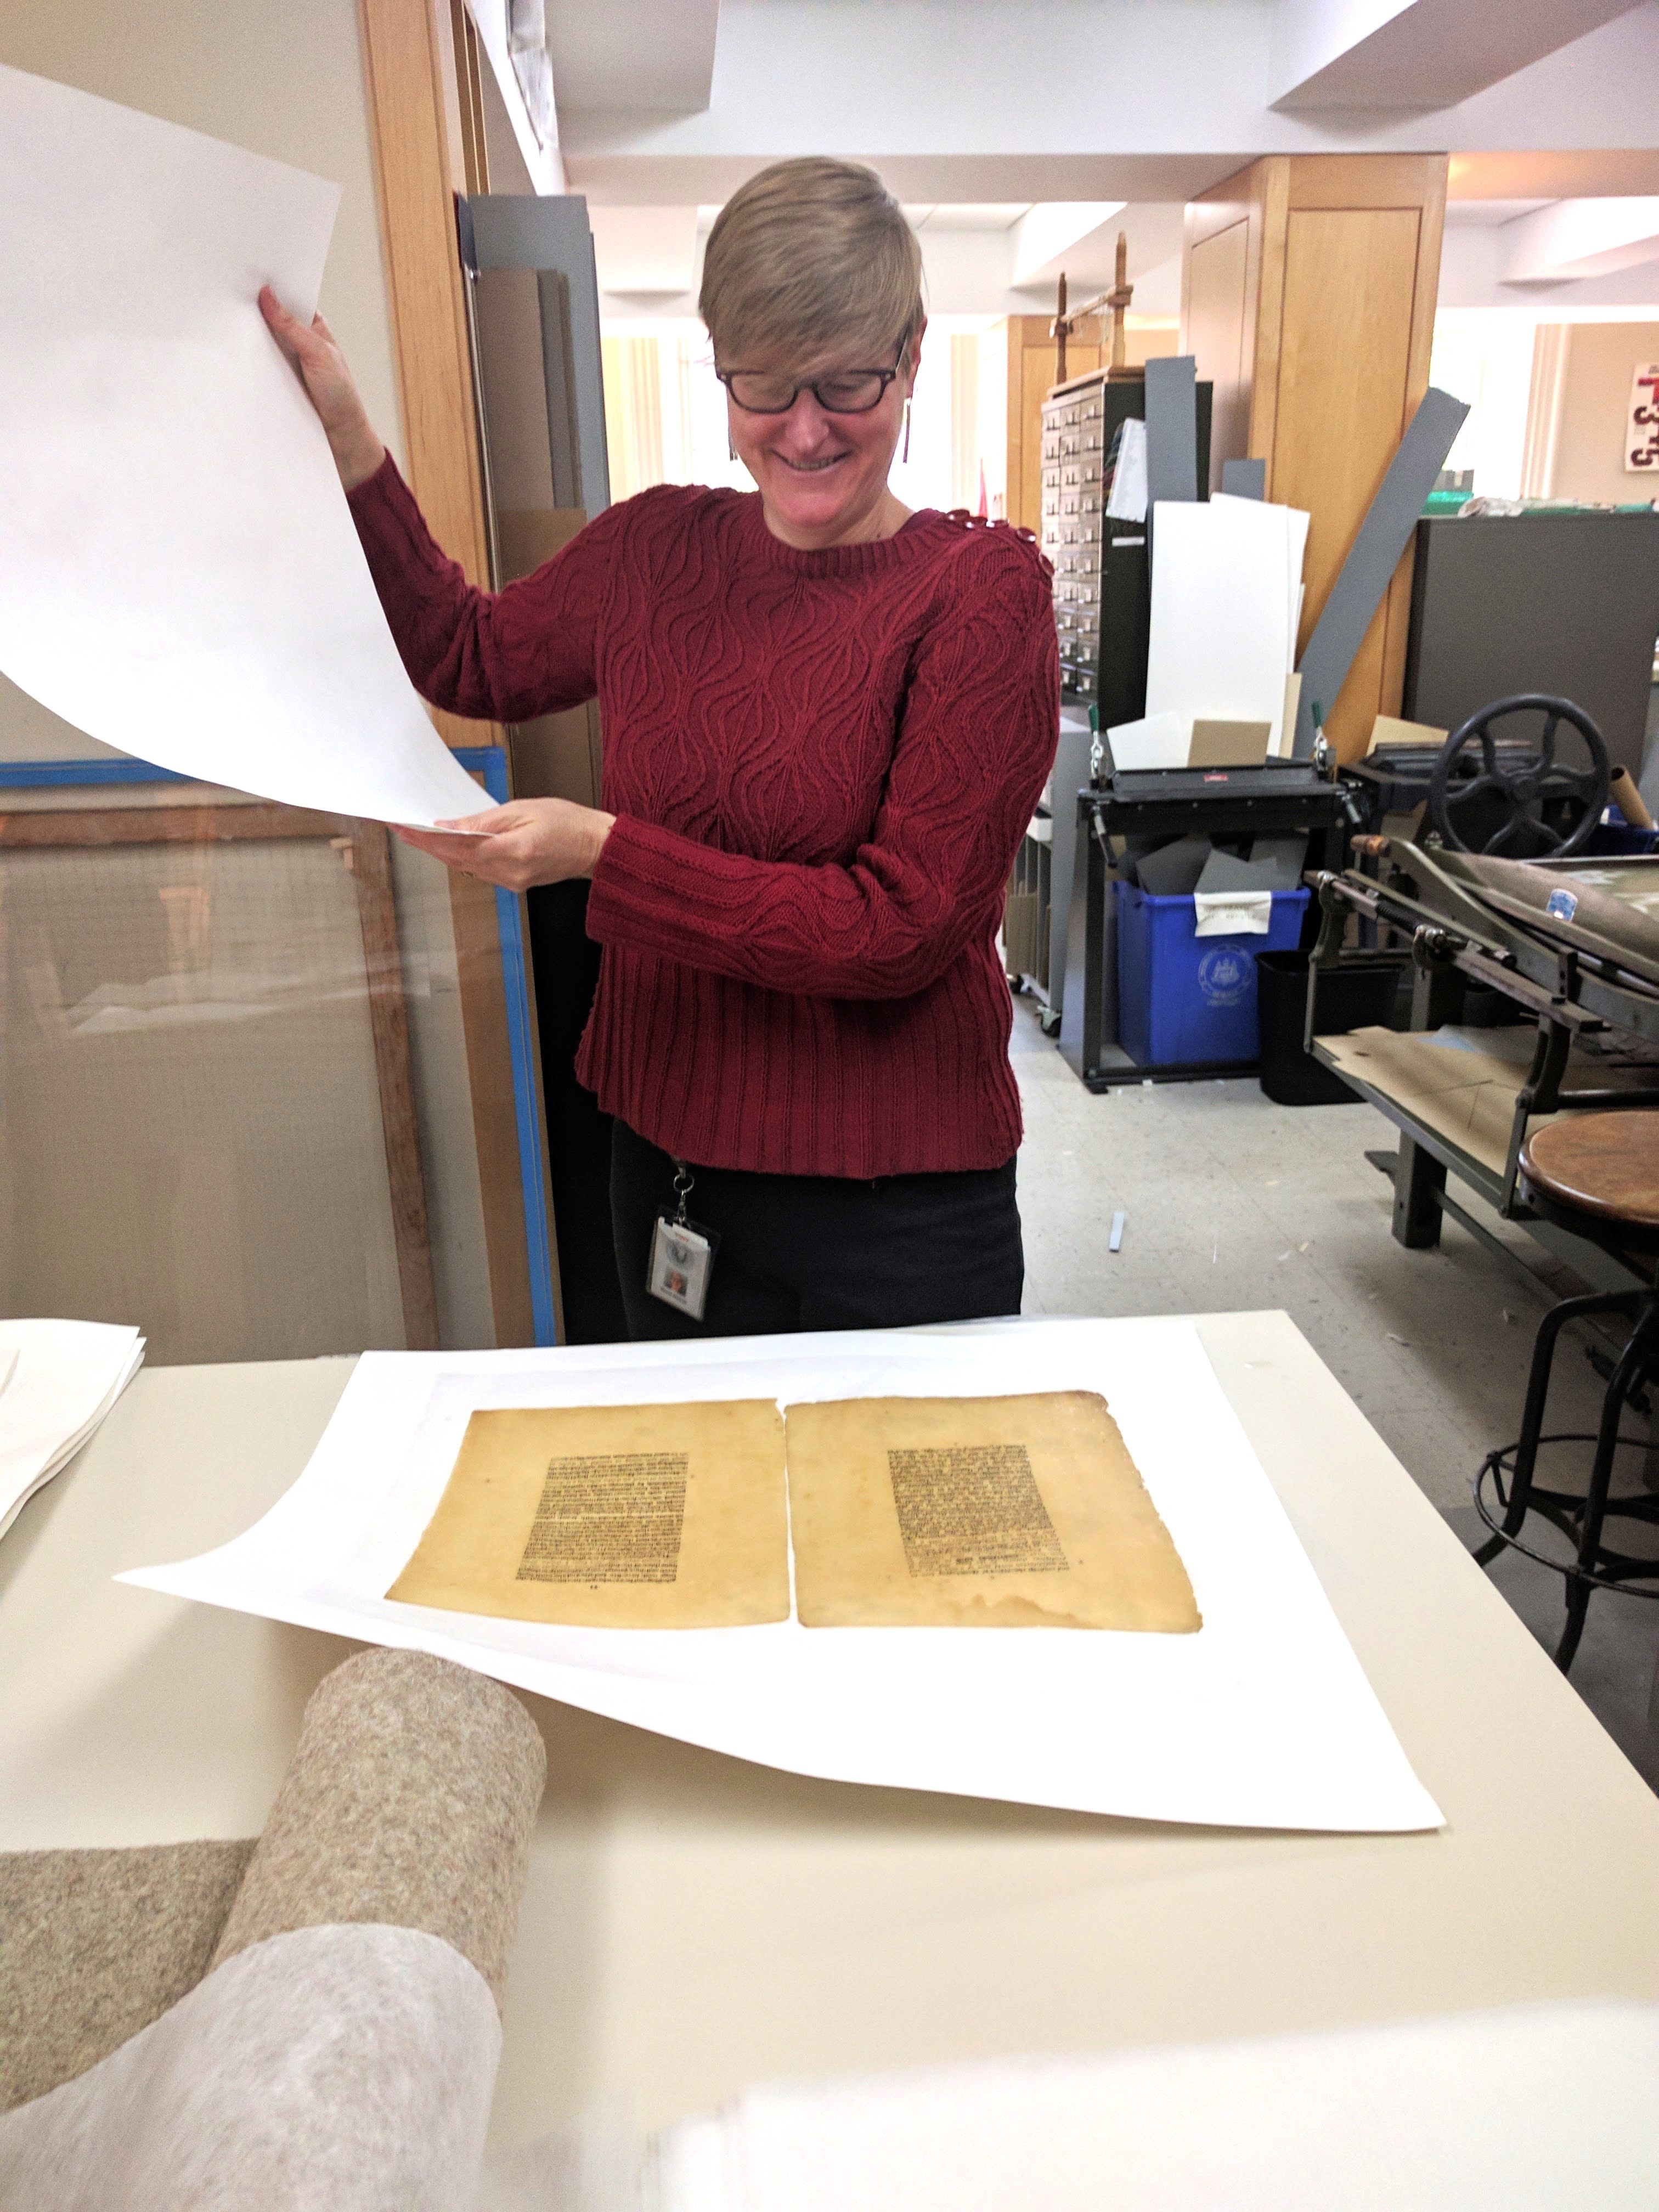 renee wolcott standing with documents being conserved